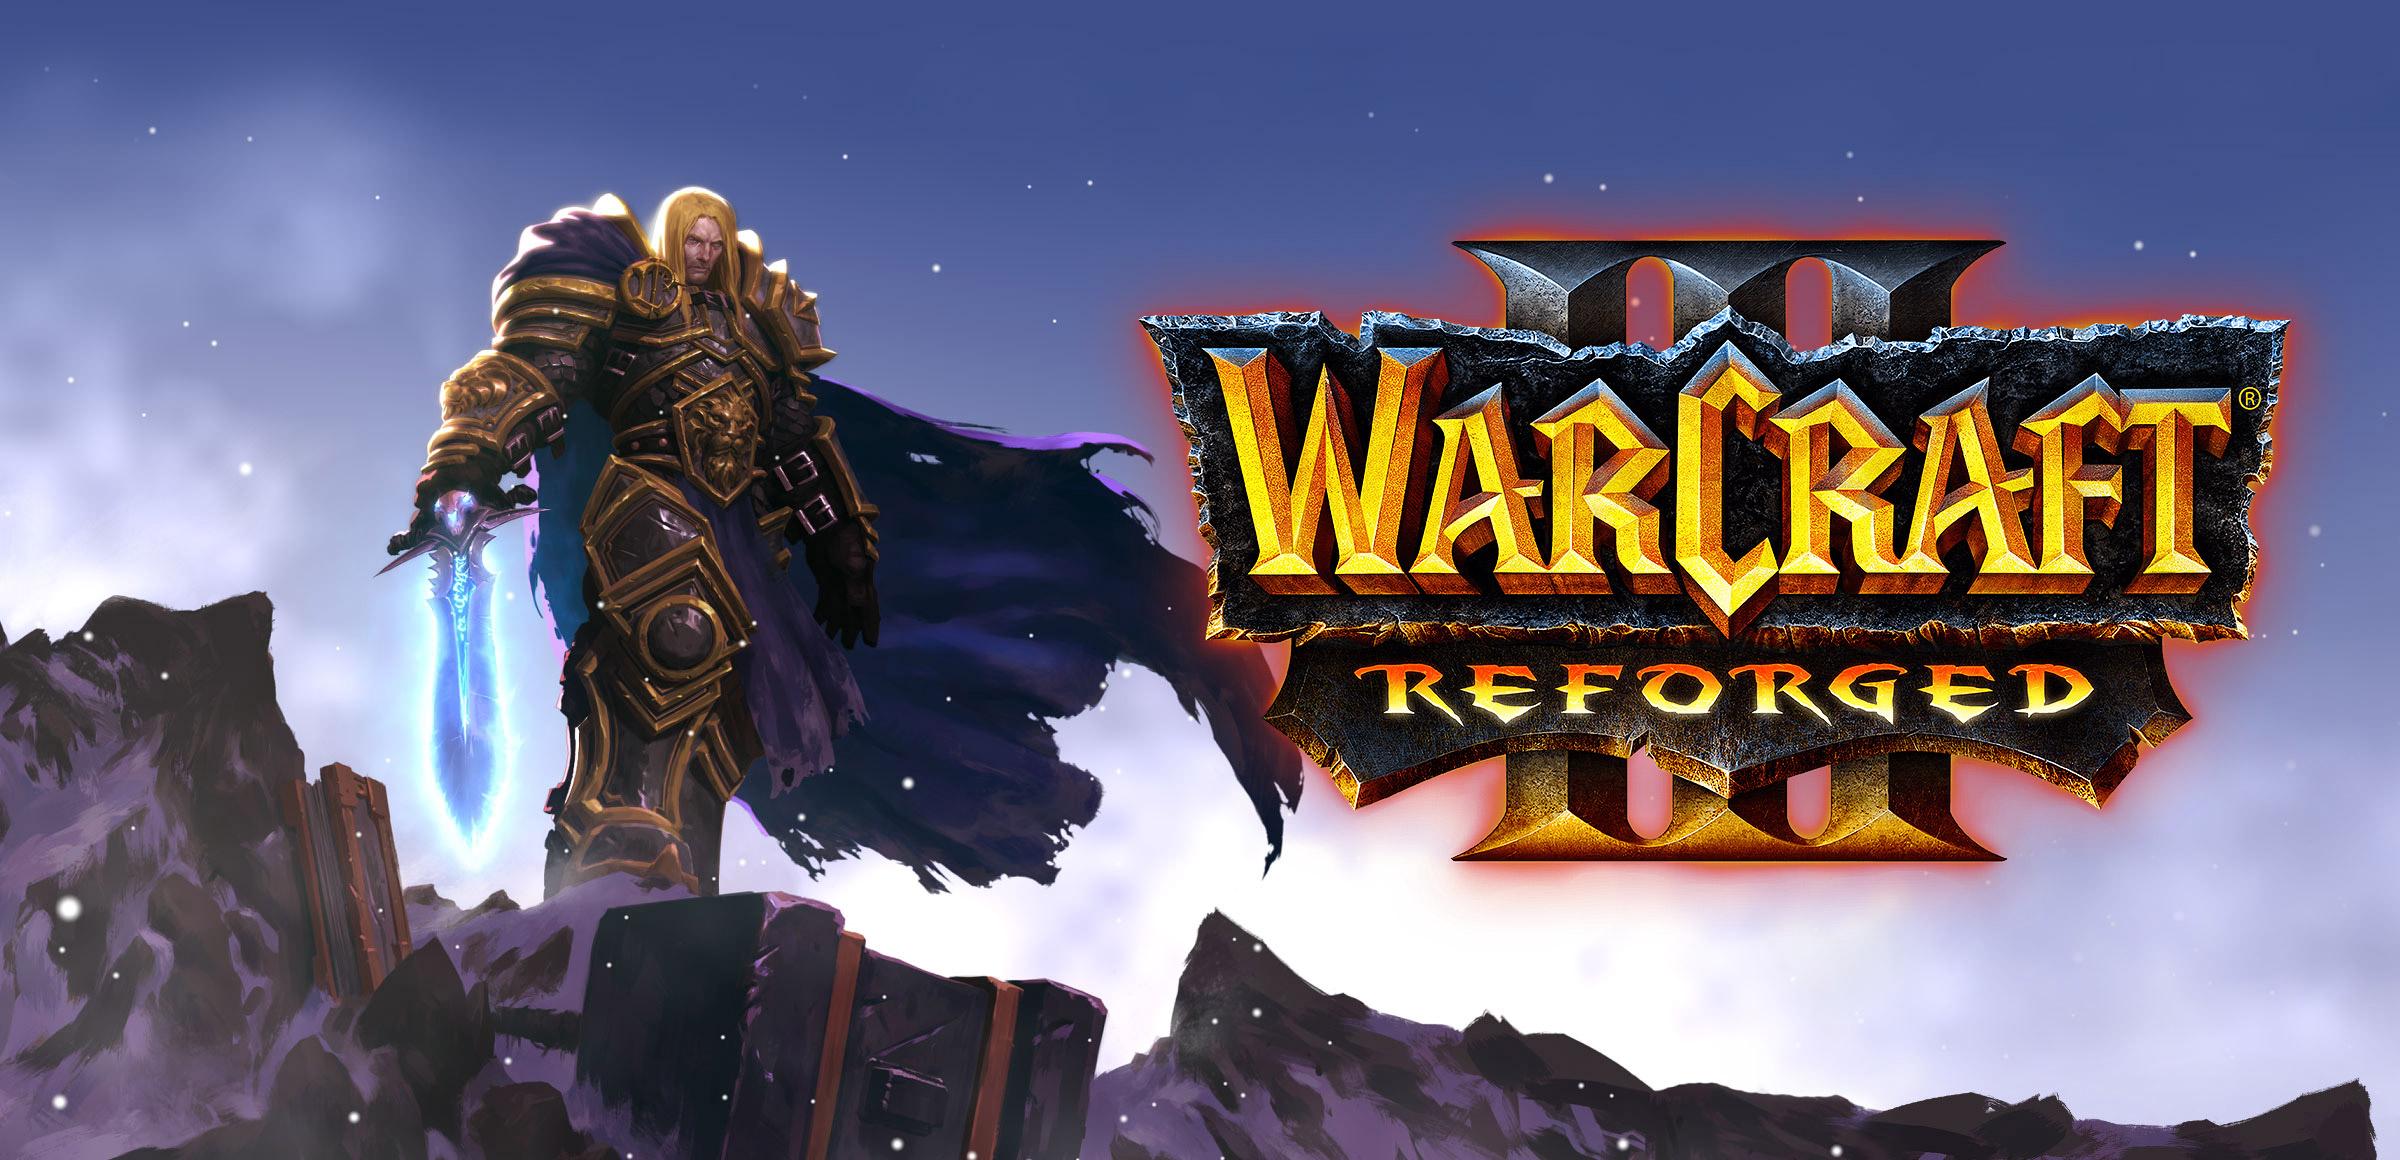 Warcraft III: Reforged HD Wallpaper. Background Image